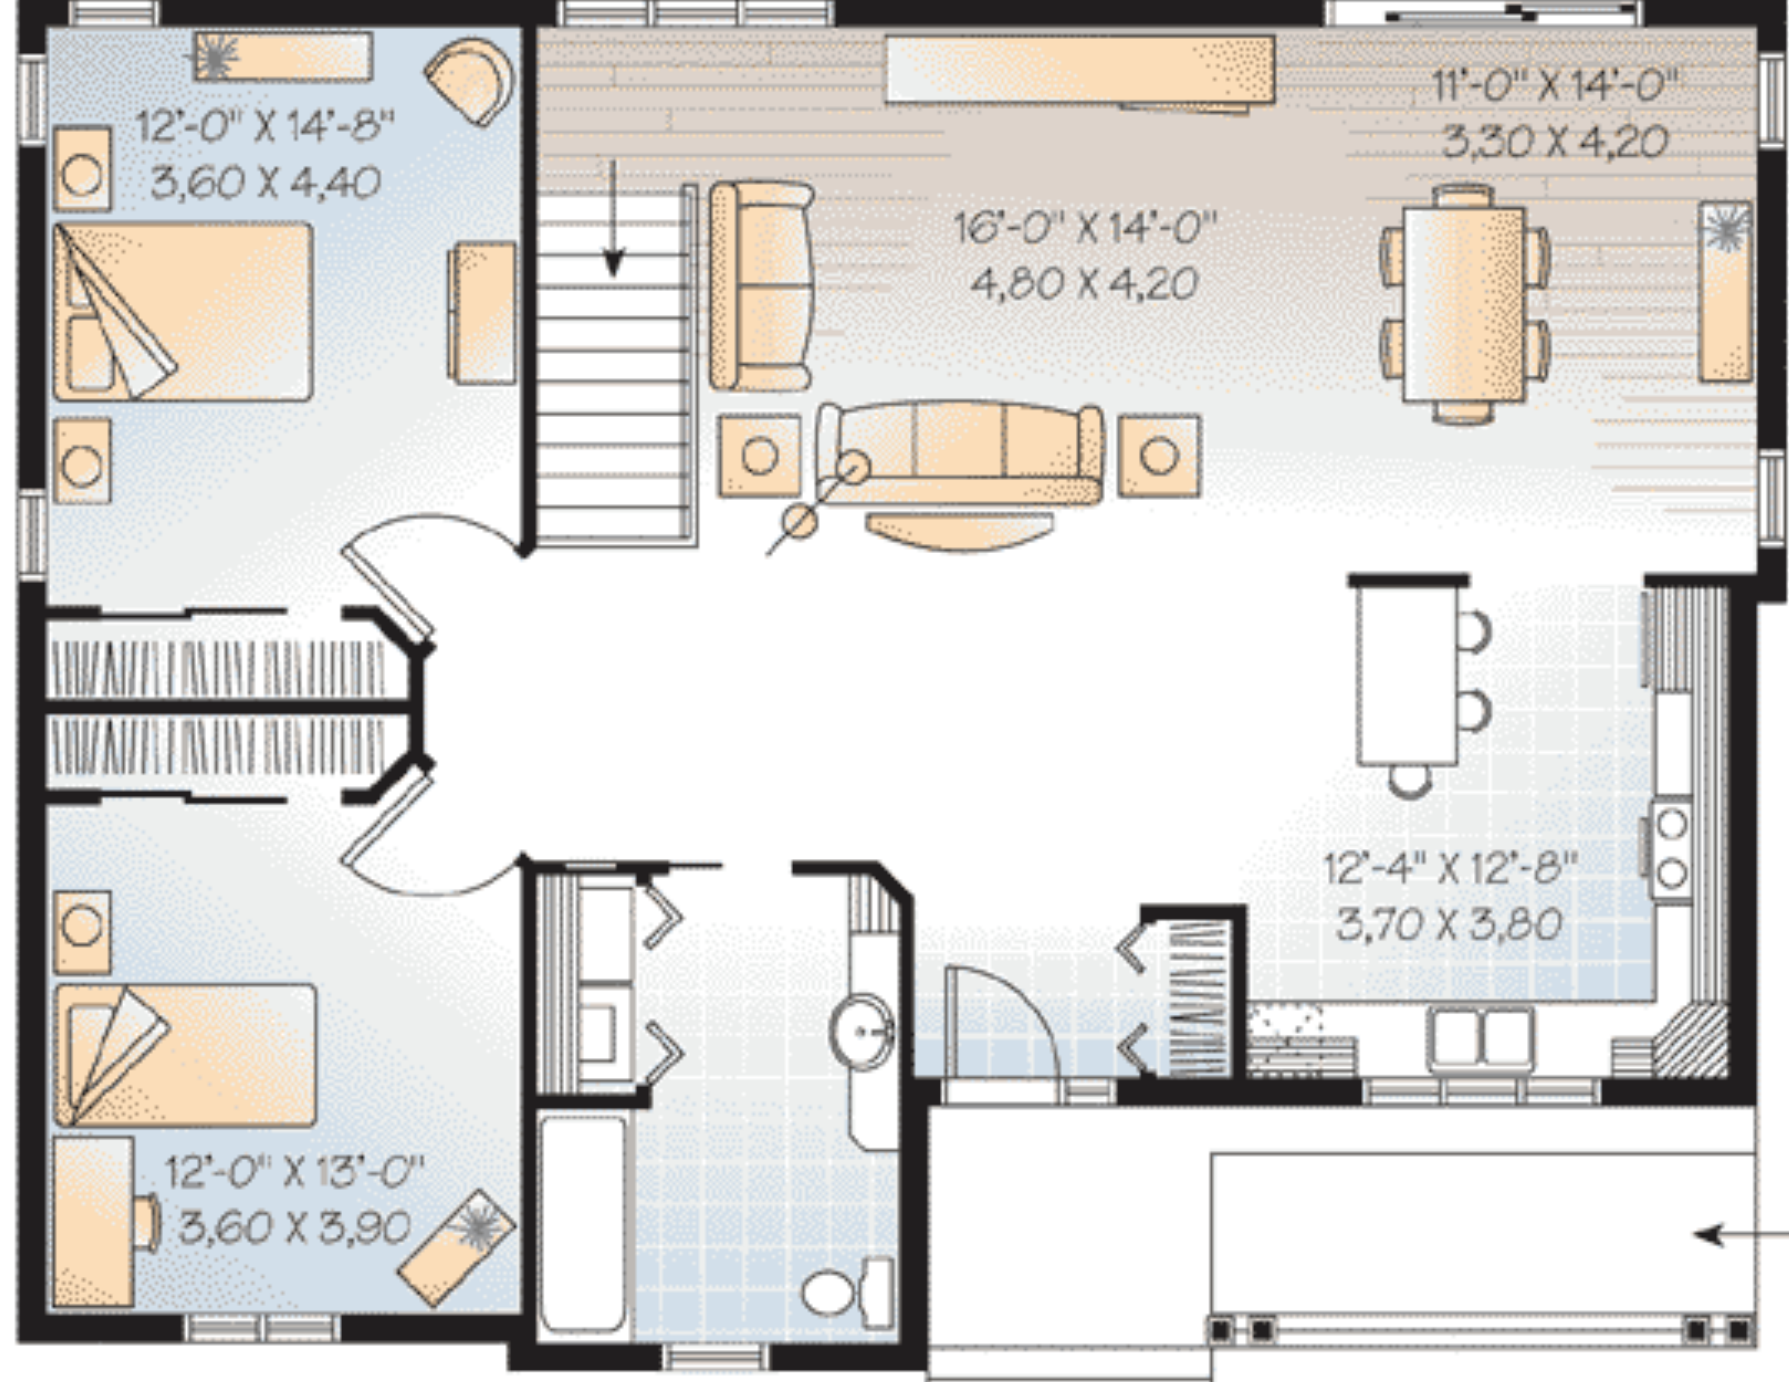 Floor plan for the age-in-place lifestyle.